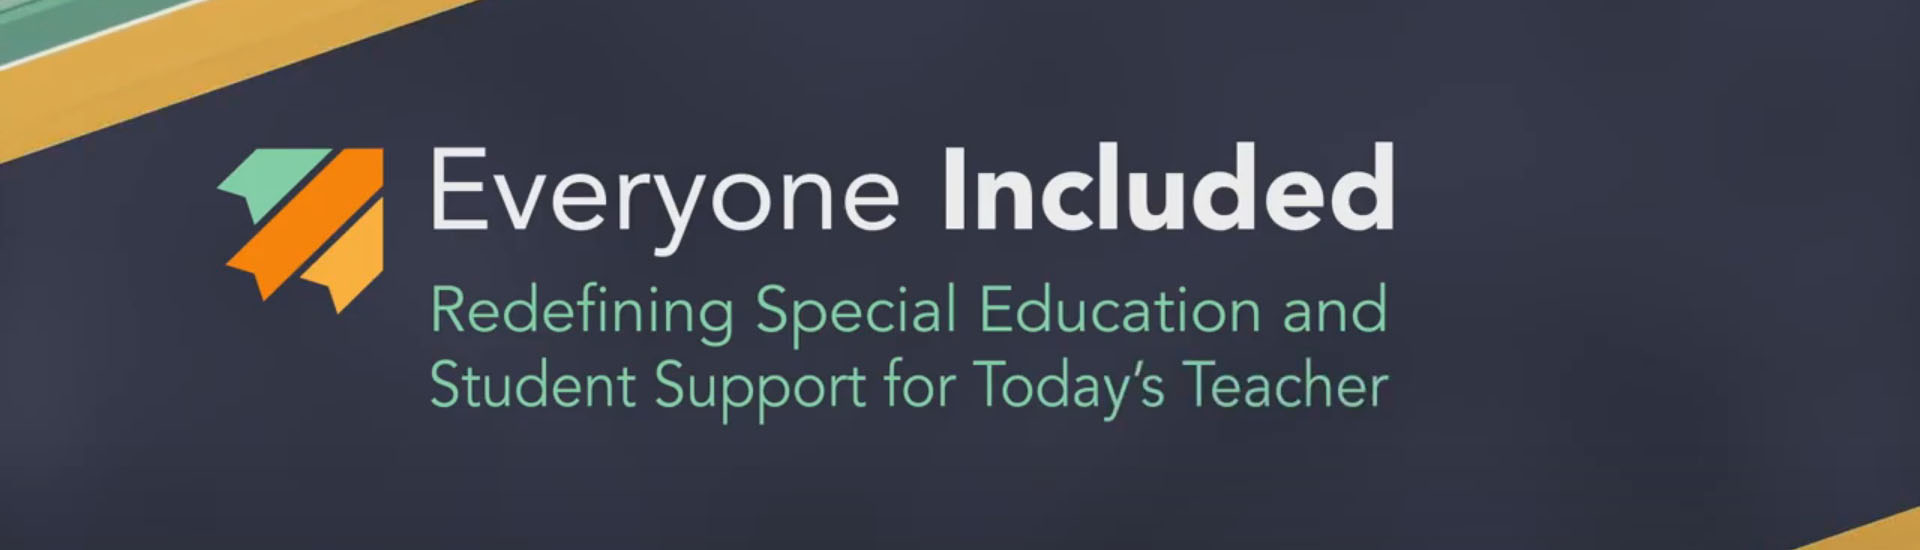 Redefining Special Education and Student Support for Today's Teacher